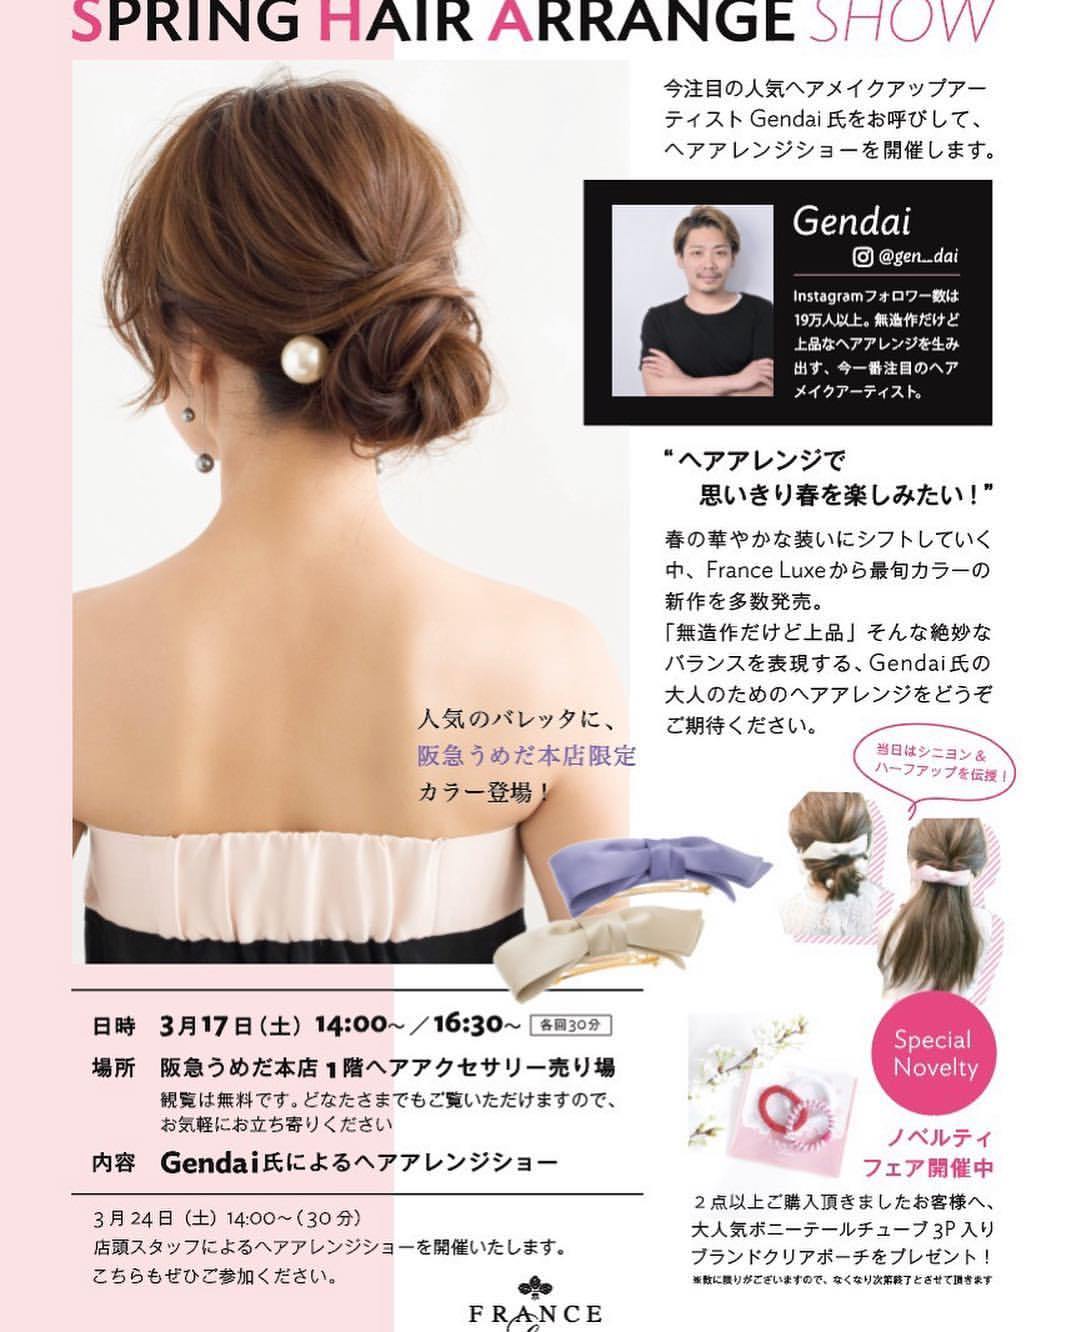 France Luxe Official Blog France Luxe Gendai Spring Hair